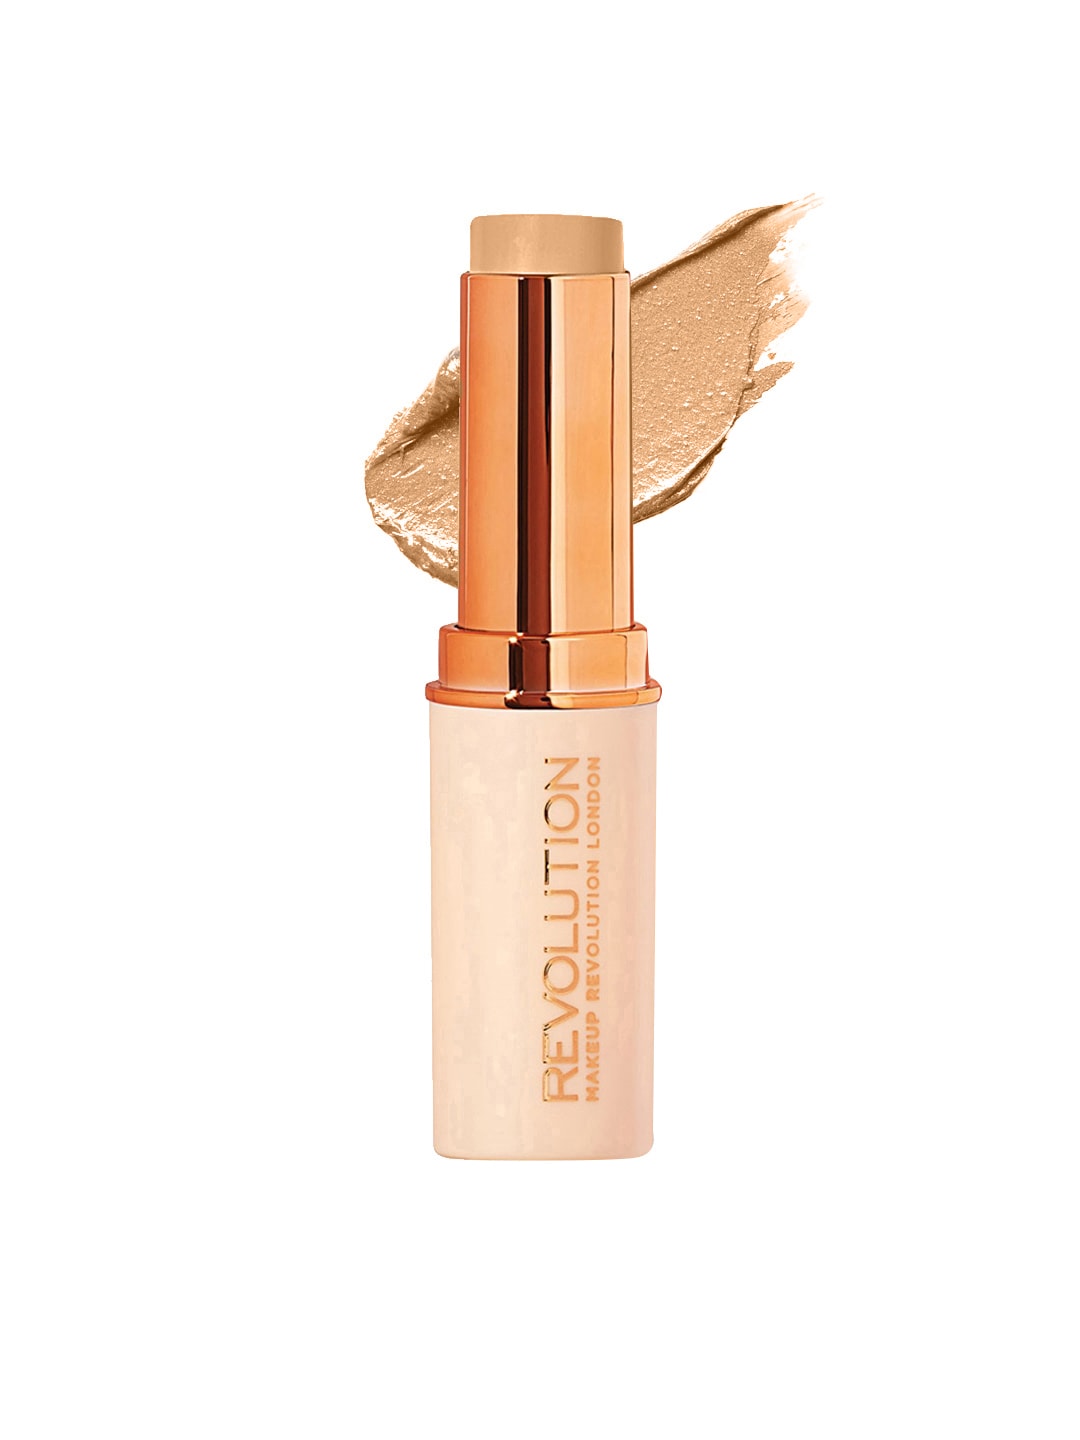 Makeup Revolution London Fast Base Stick Foundation - F10 6.2g Price in India